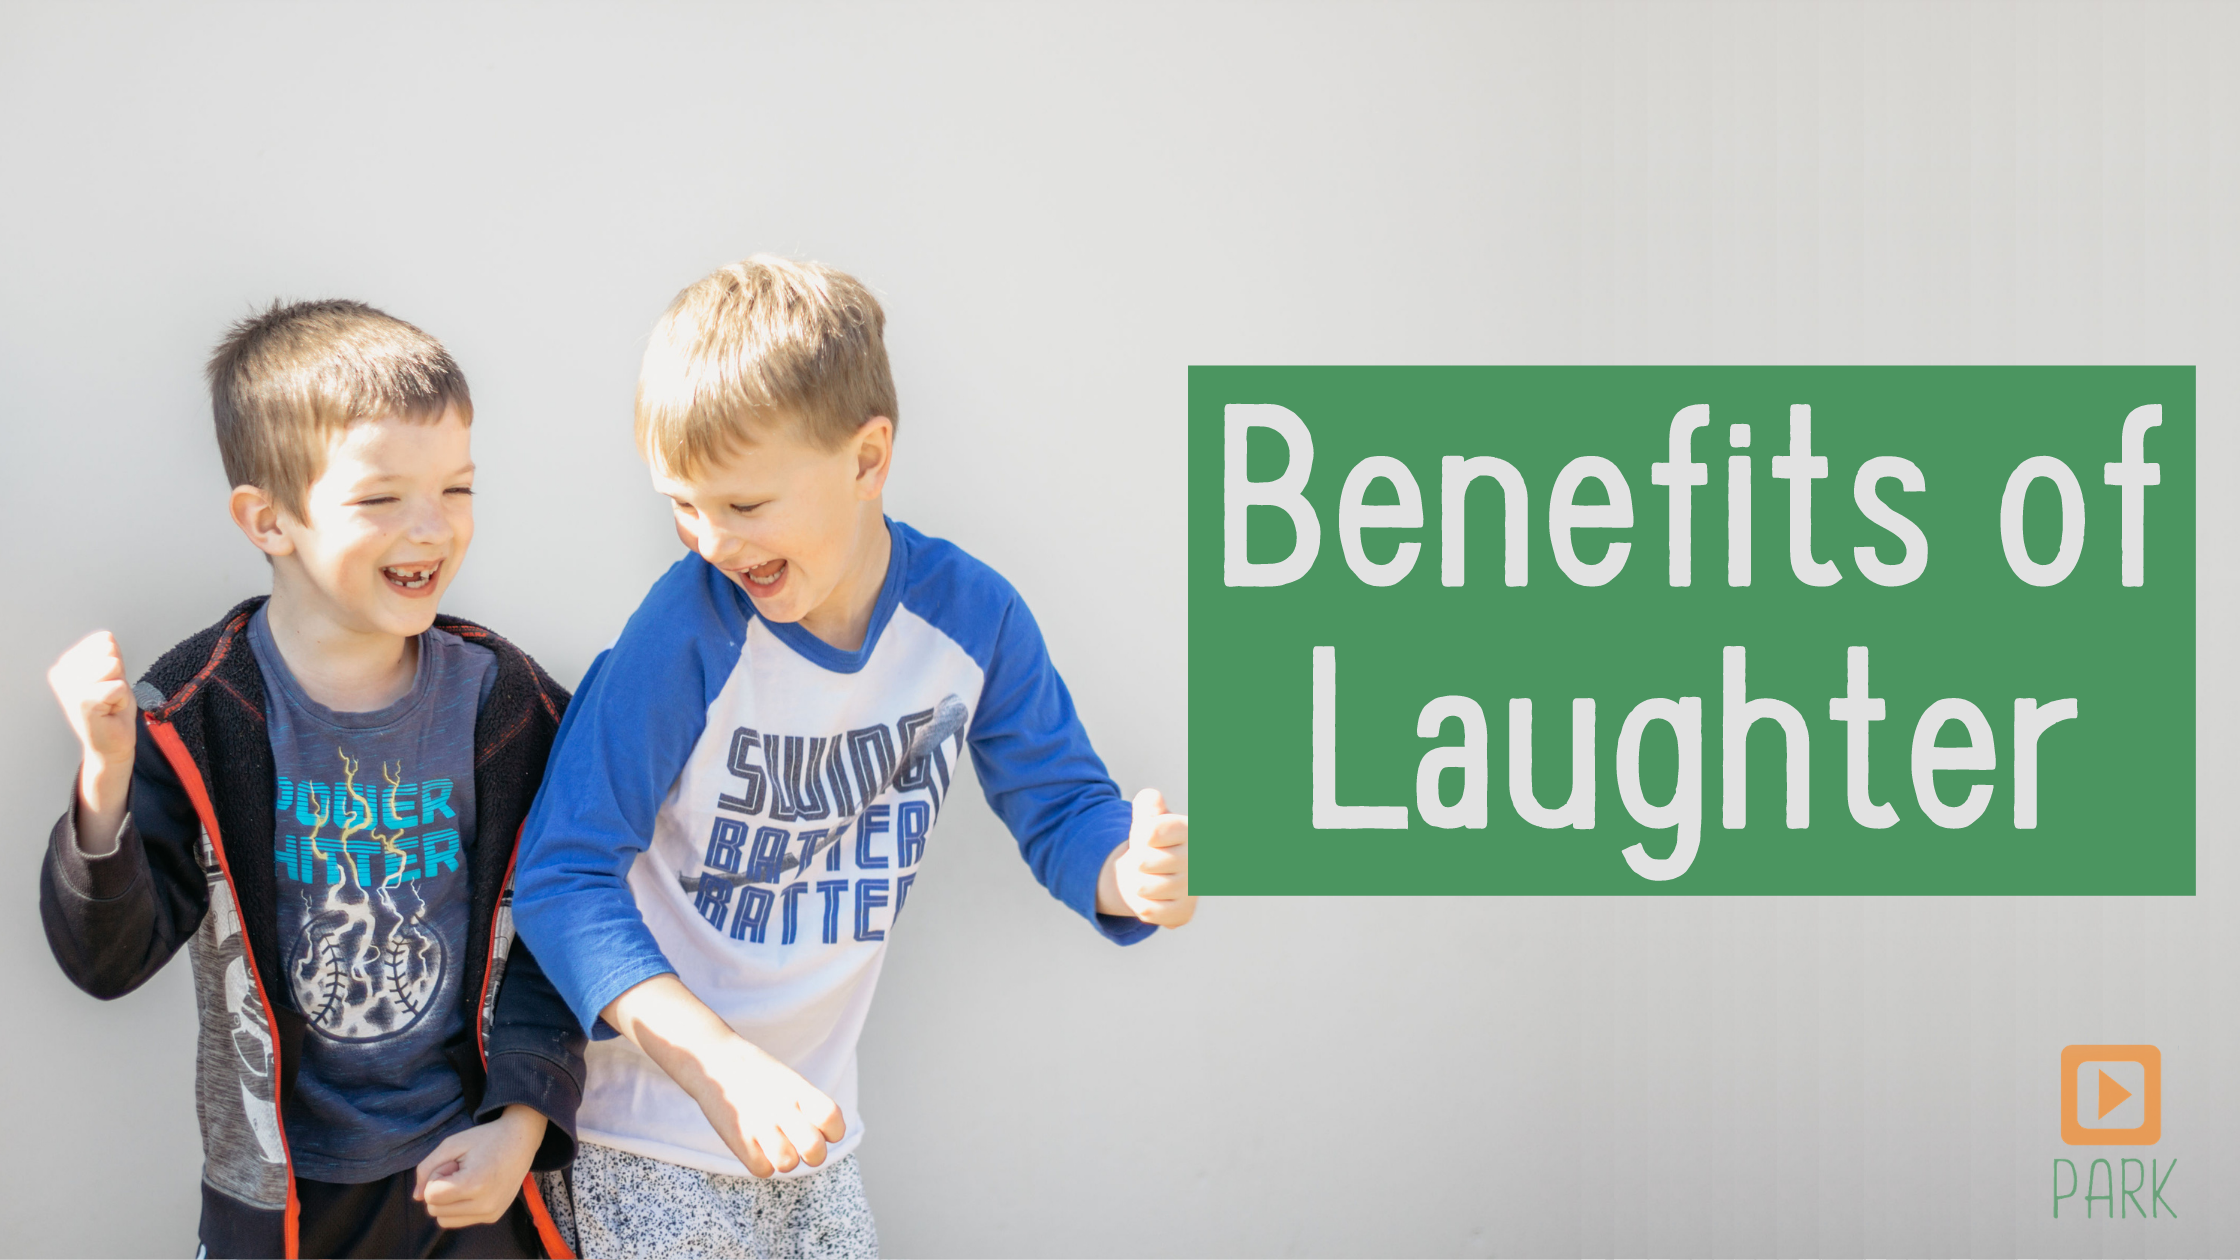 Benefits of Laughter